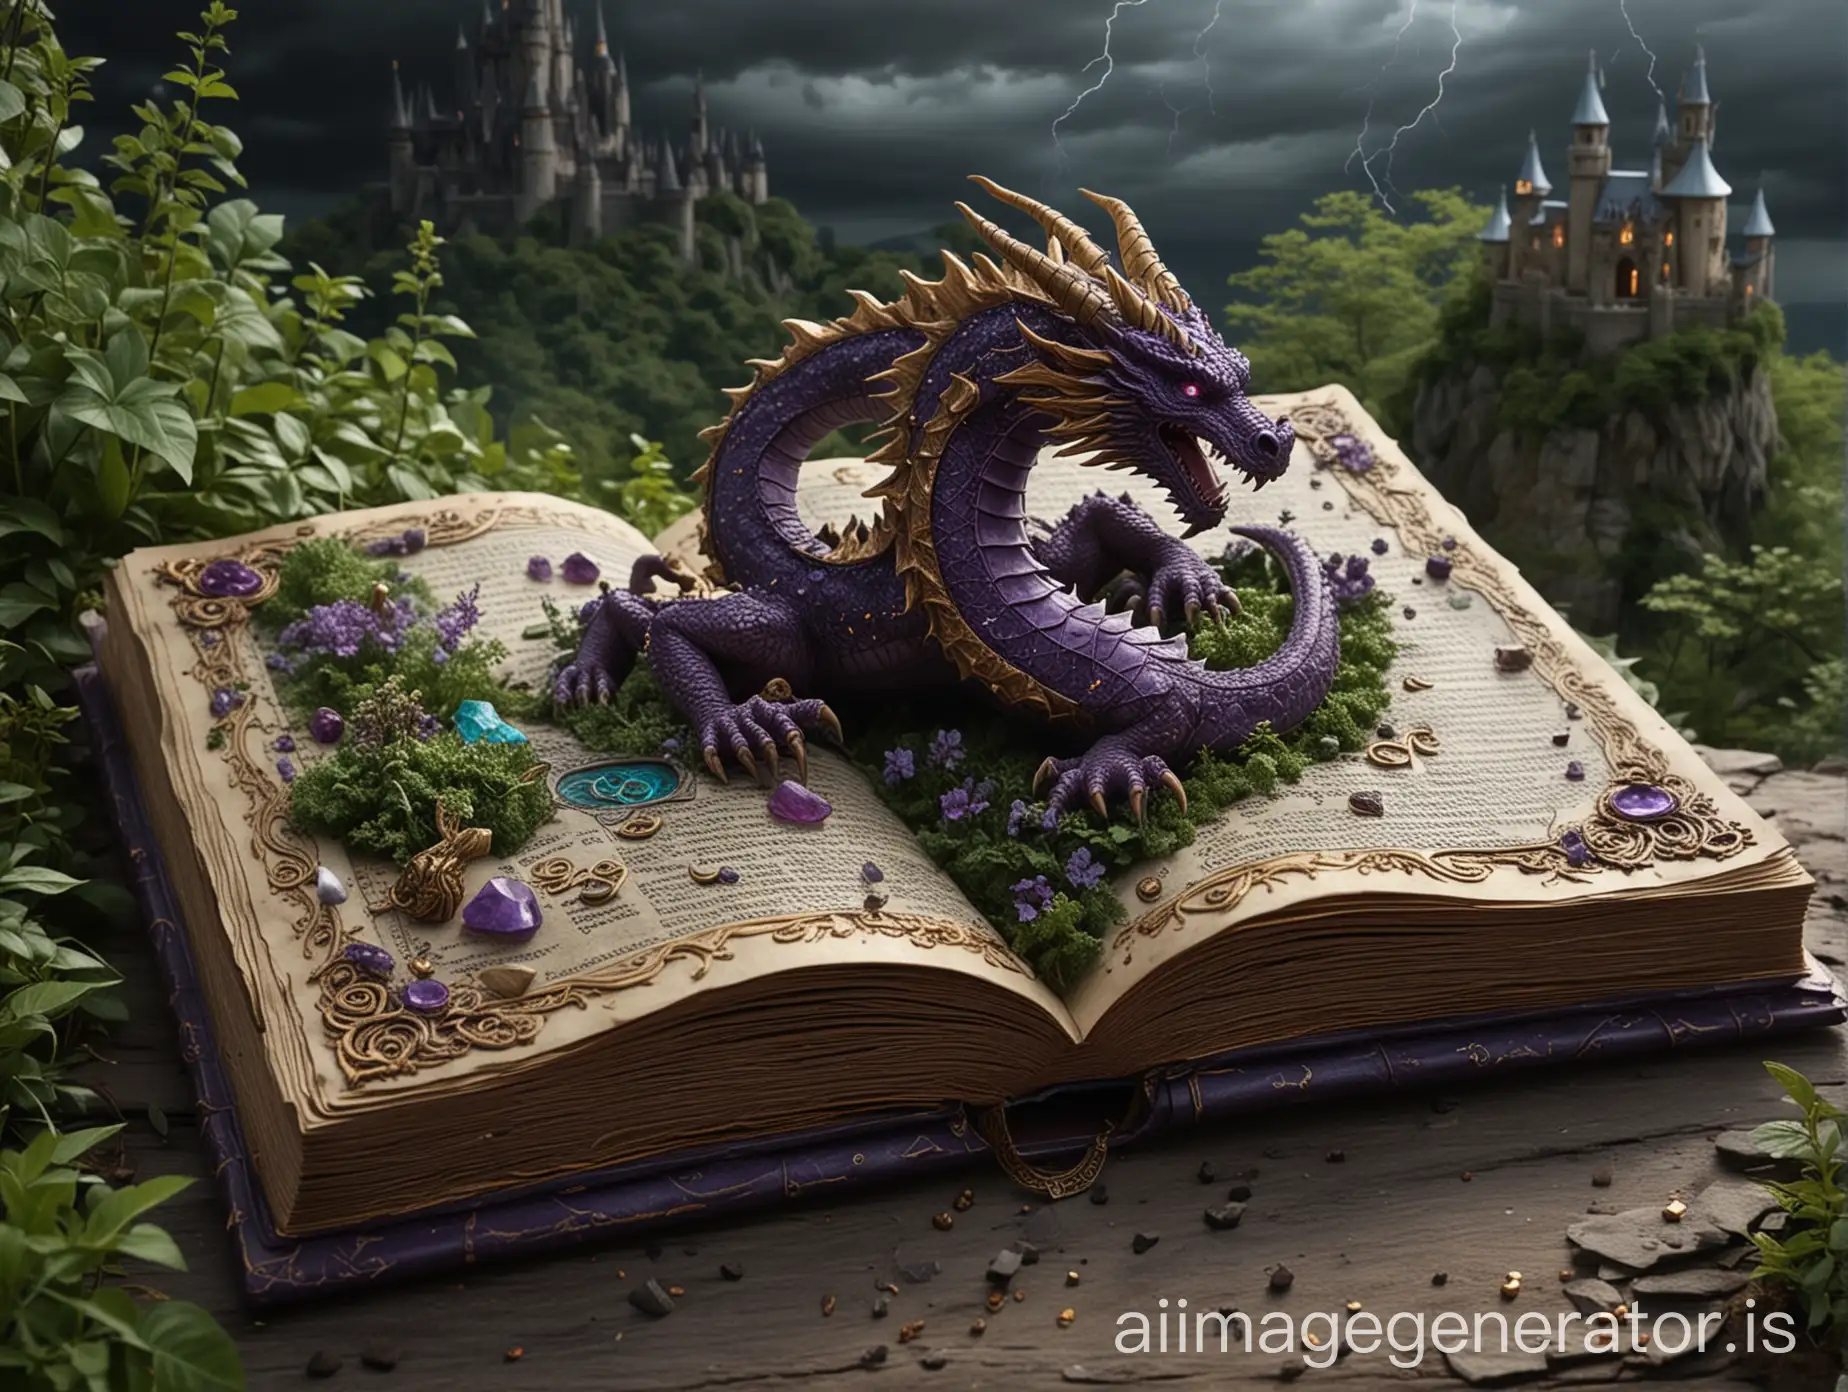 Ethereal-Dragon-Emerges-from-Ancient-Grimoire-amid-Ruined-Castle-and-Thunderstorm